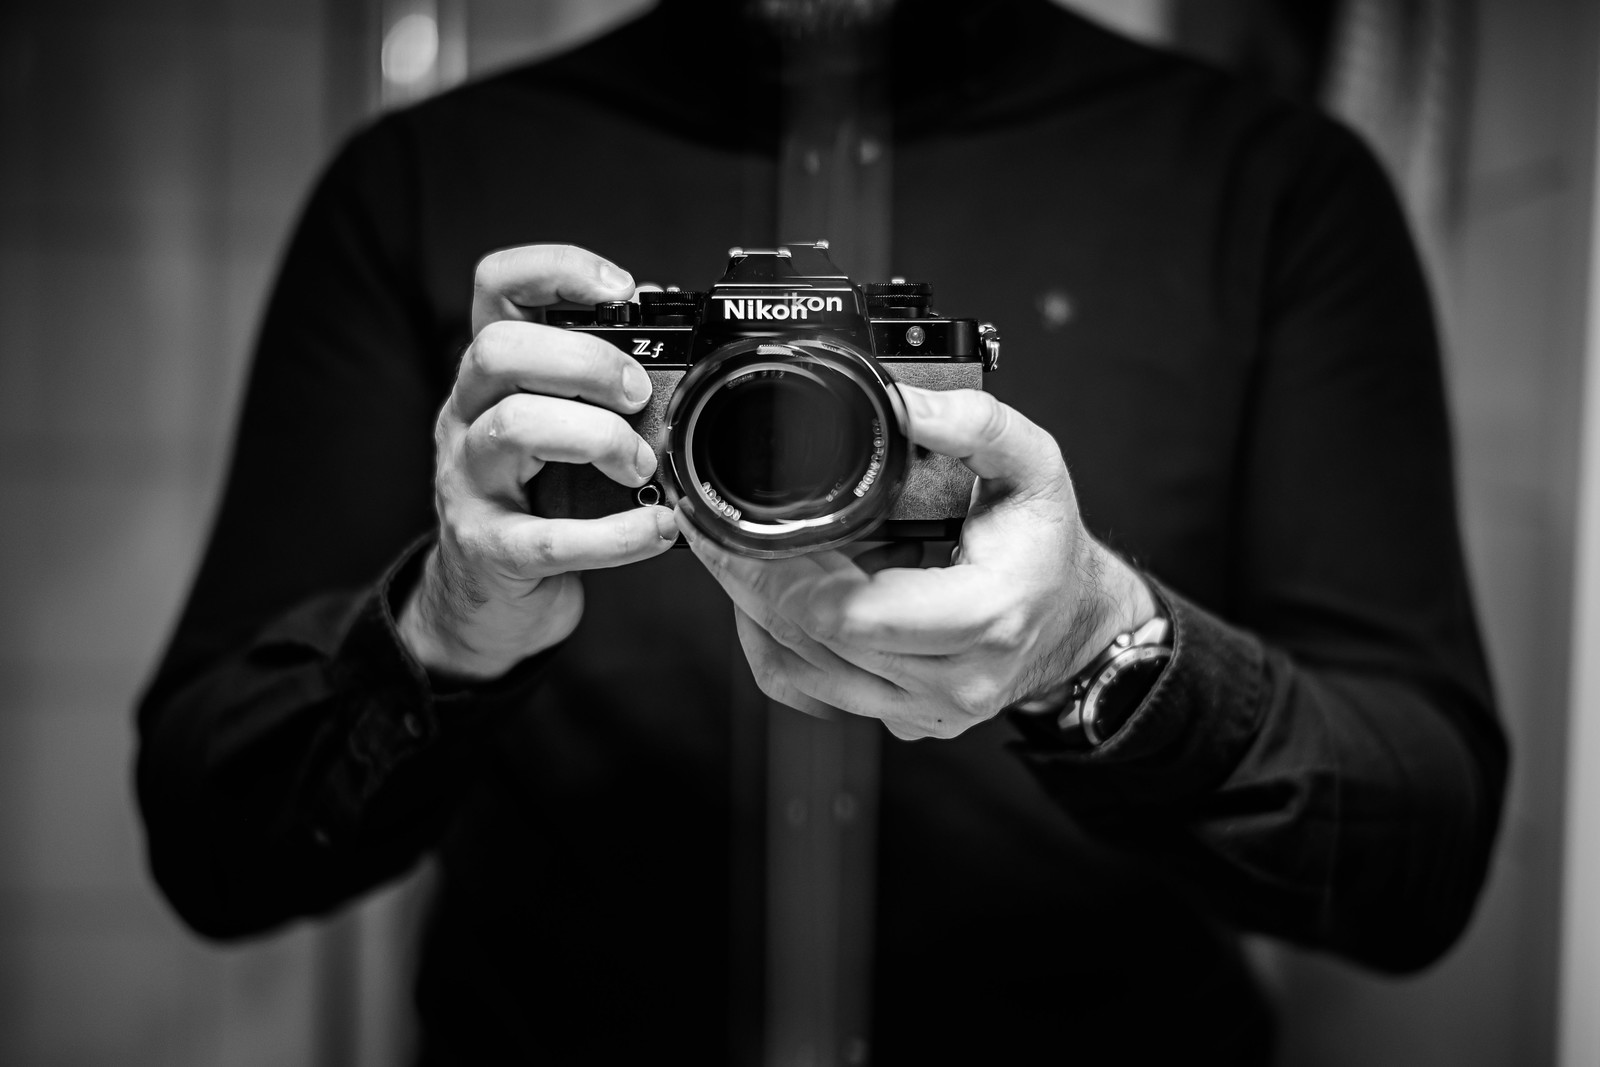 Selfie with the Nikon Zf in the mirror